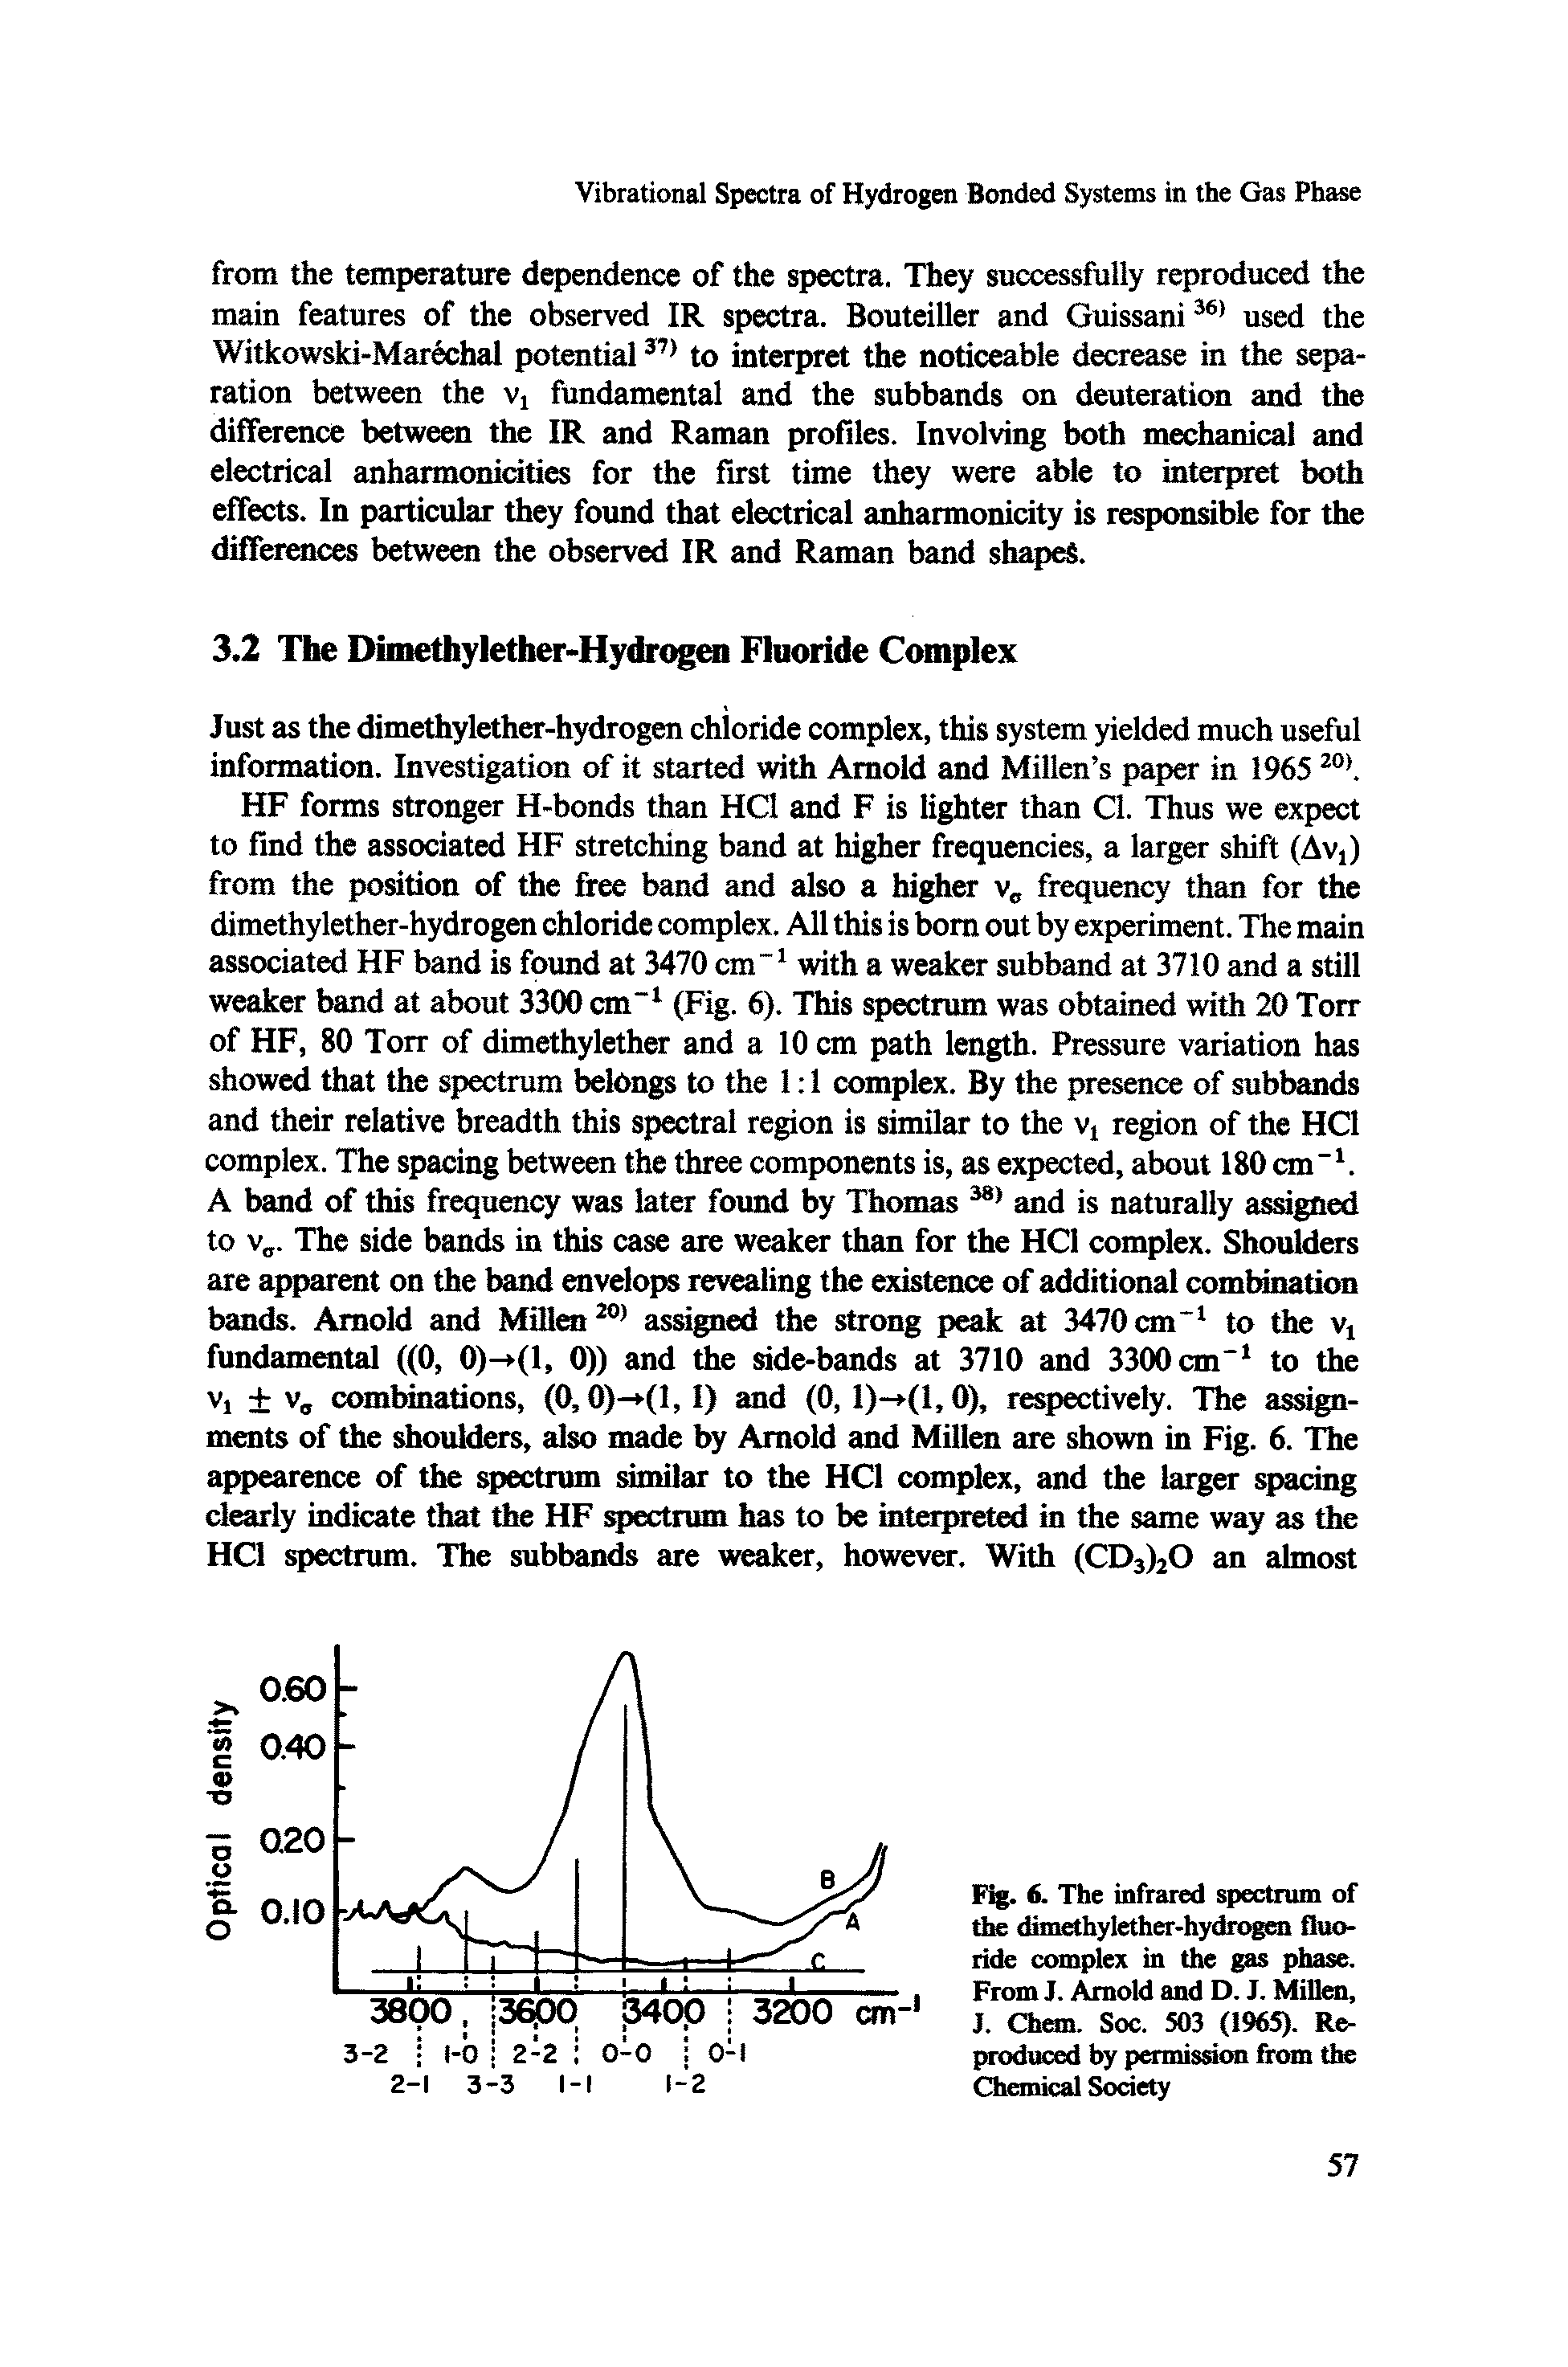 Fig. 6. The infrared spectrum of the dimethylether-hydrogen fluoride complex in the gas phase. From J. Arnold and D. J. Millen, J. Chem. Soc. 503 (1965). Reproduced by permission from the Chemical Society...